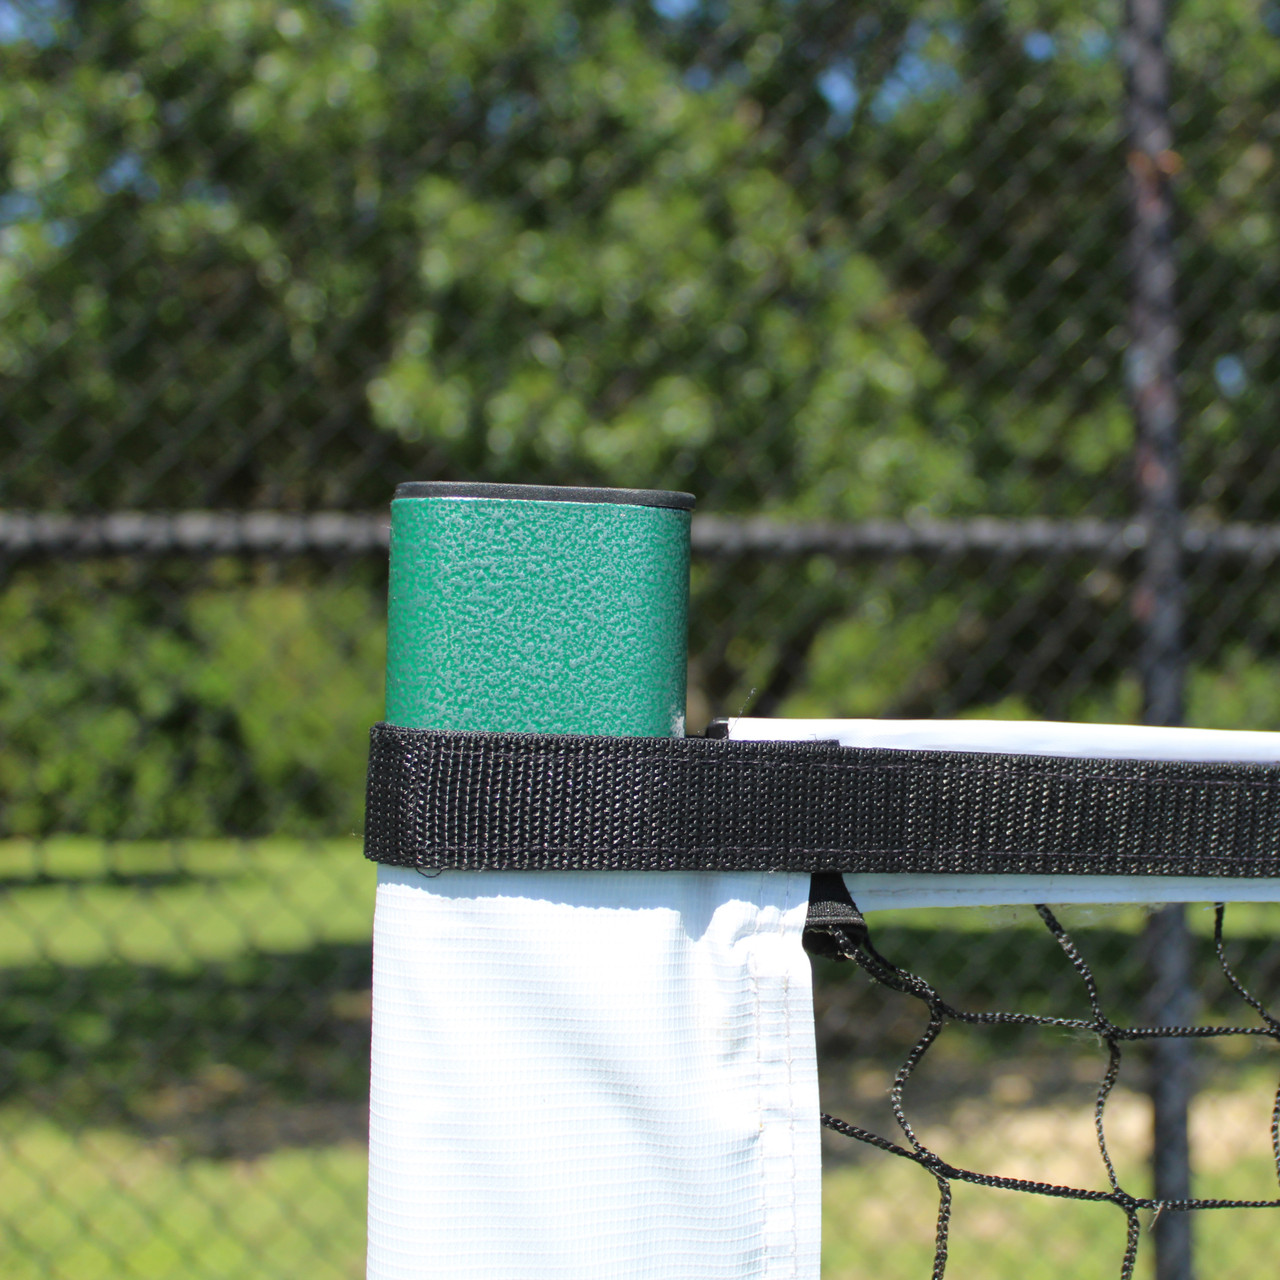 Roll-a-Net Portable Tennis Net - Patented Oval Tube System